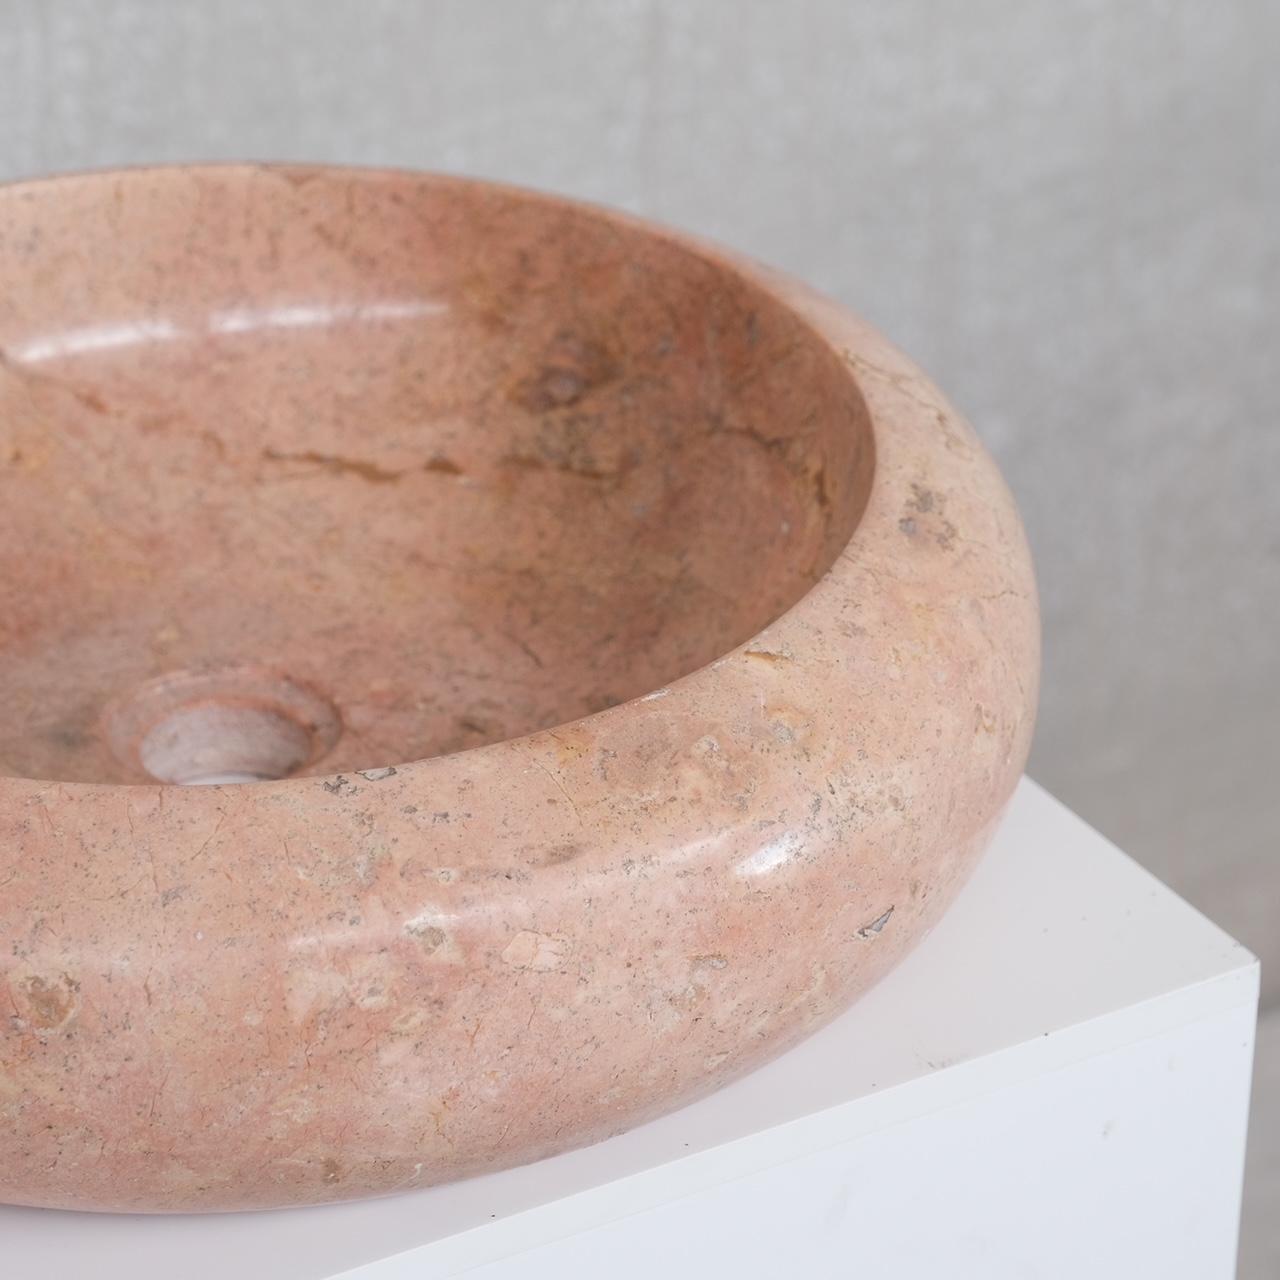 A vintage pink marble sink.

Circular bowl shape.

Ideal for re-use in a bathroom. Perhaps over an antique drawers or Primitive table.

France, circa 1960s.

Solid marble.

Some scuffs and wear commensurate with age.

Location: Belgium